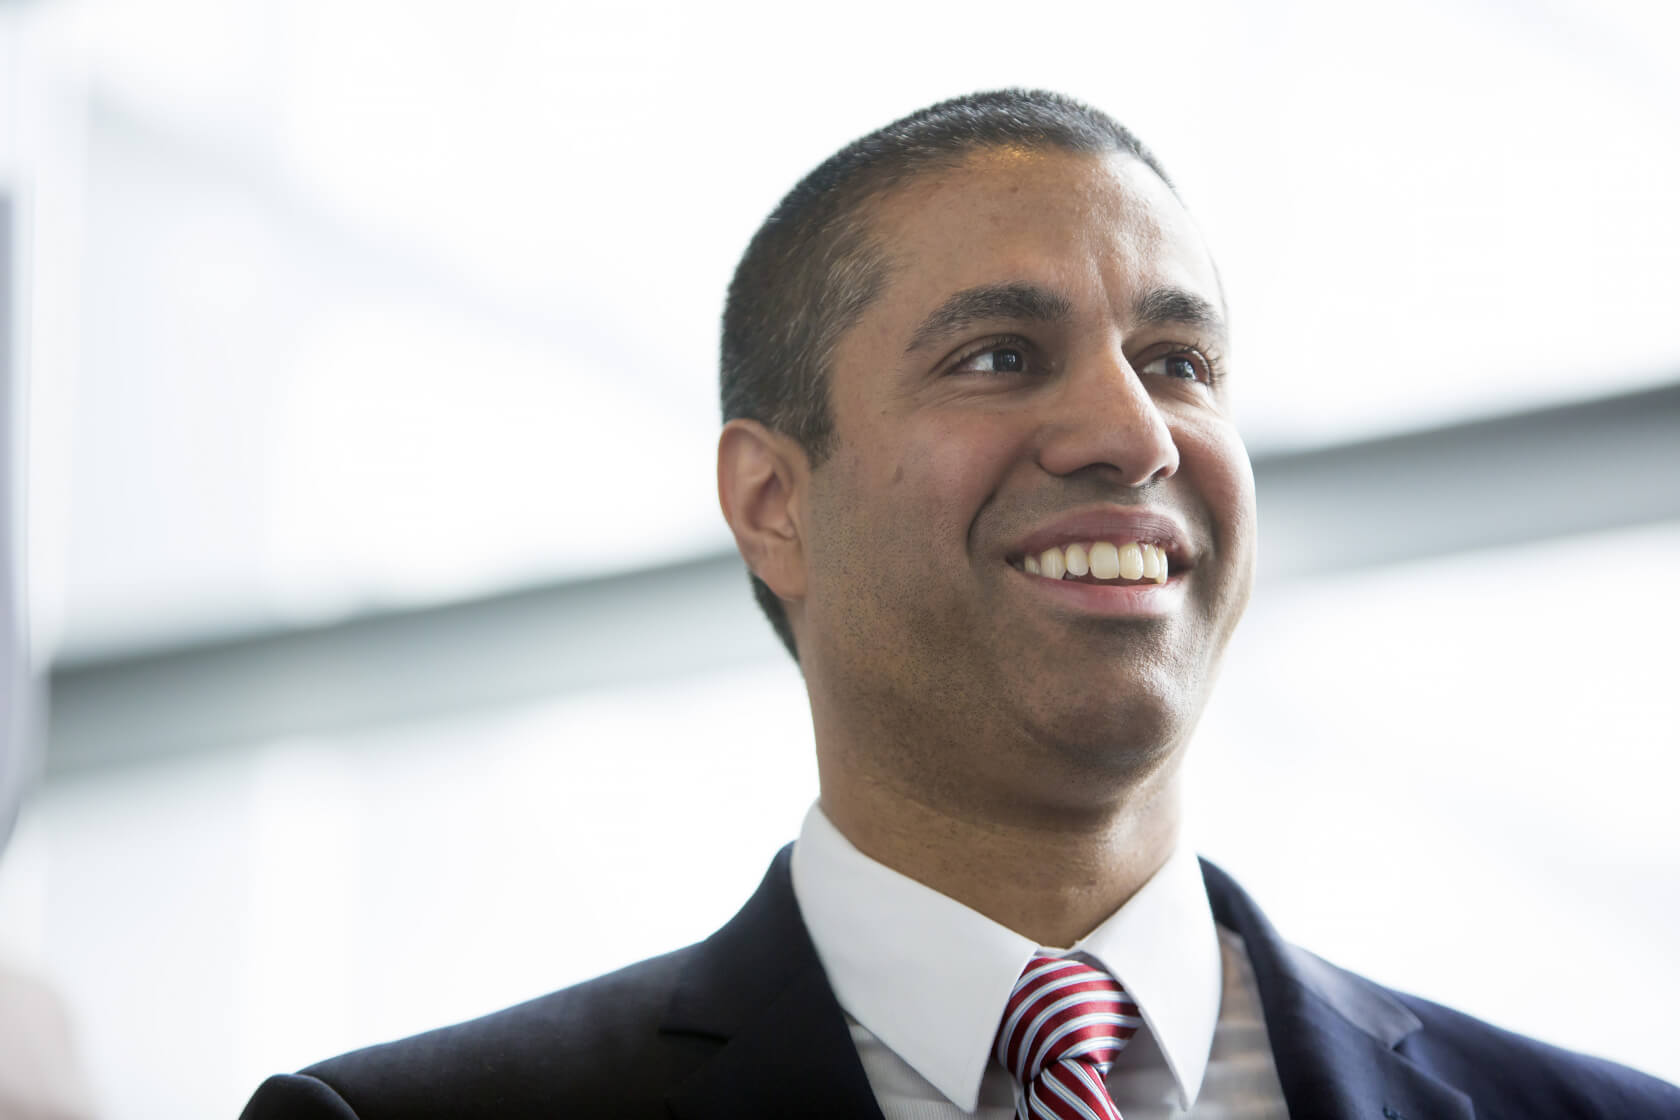 FCC Chairman Ajit Pai is under investigation over improper relationship with Sinclair Broadcasting